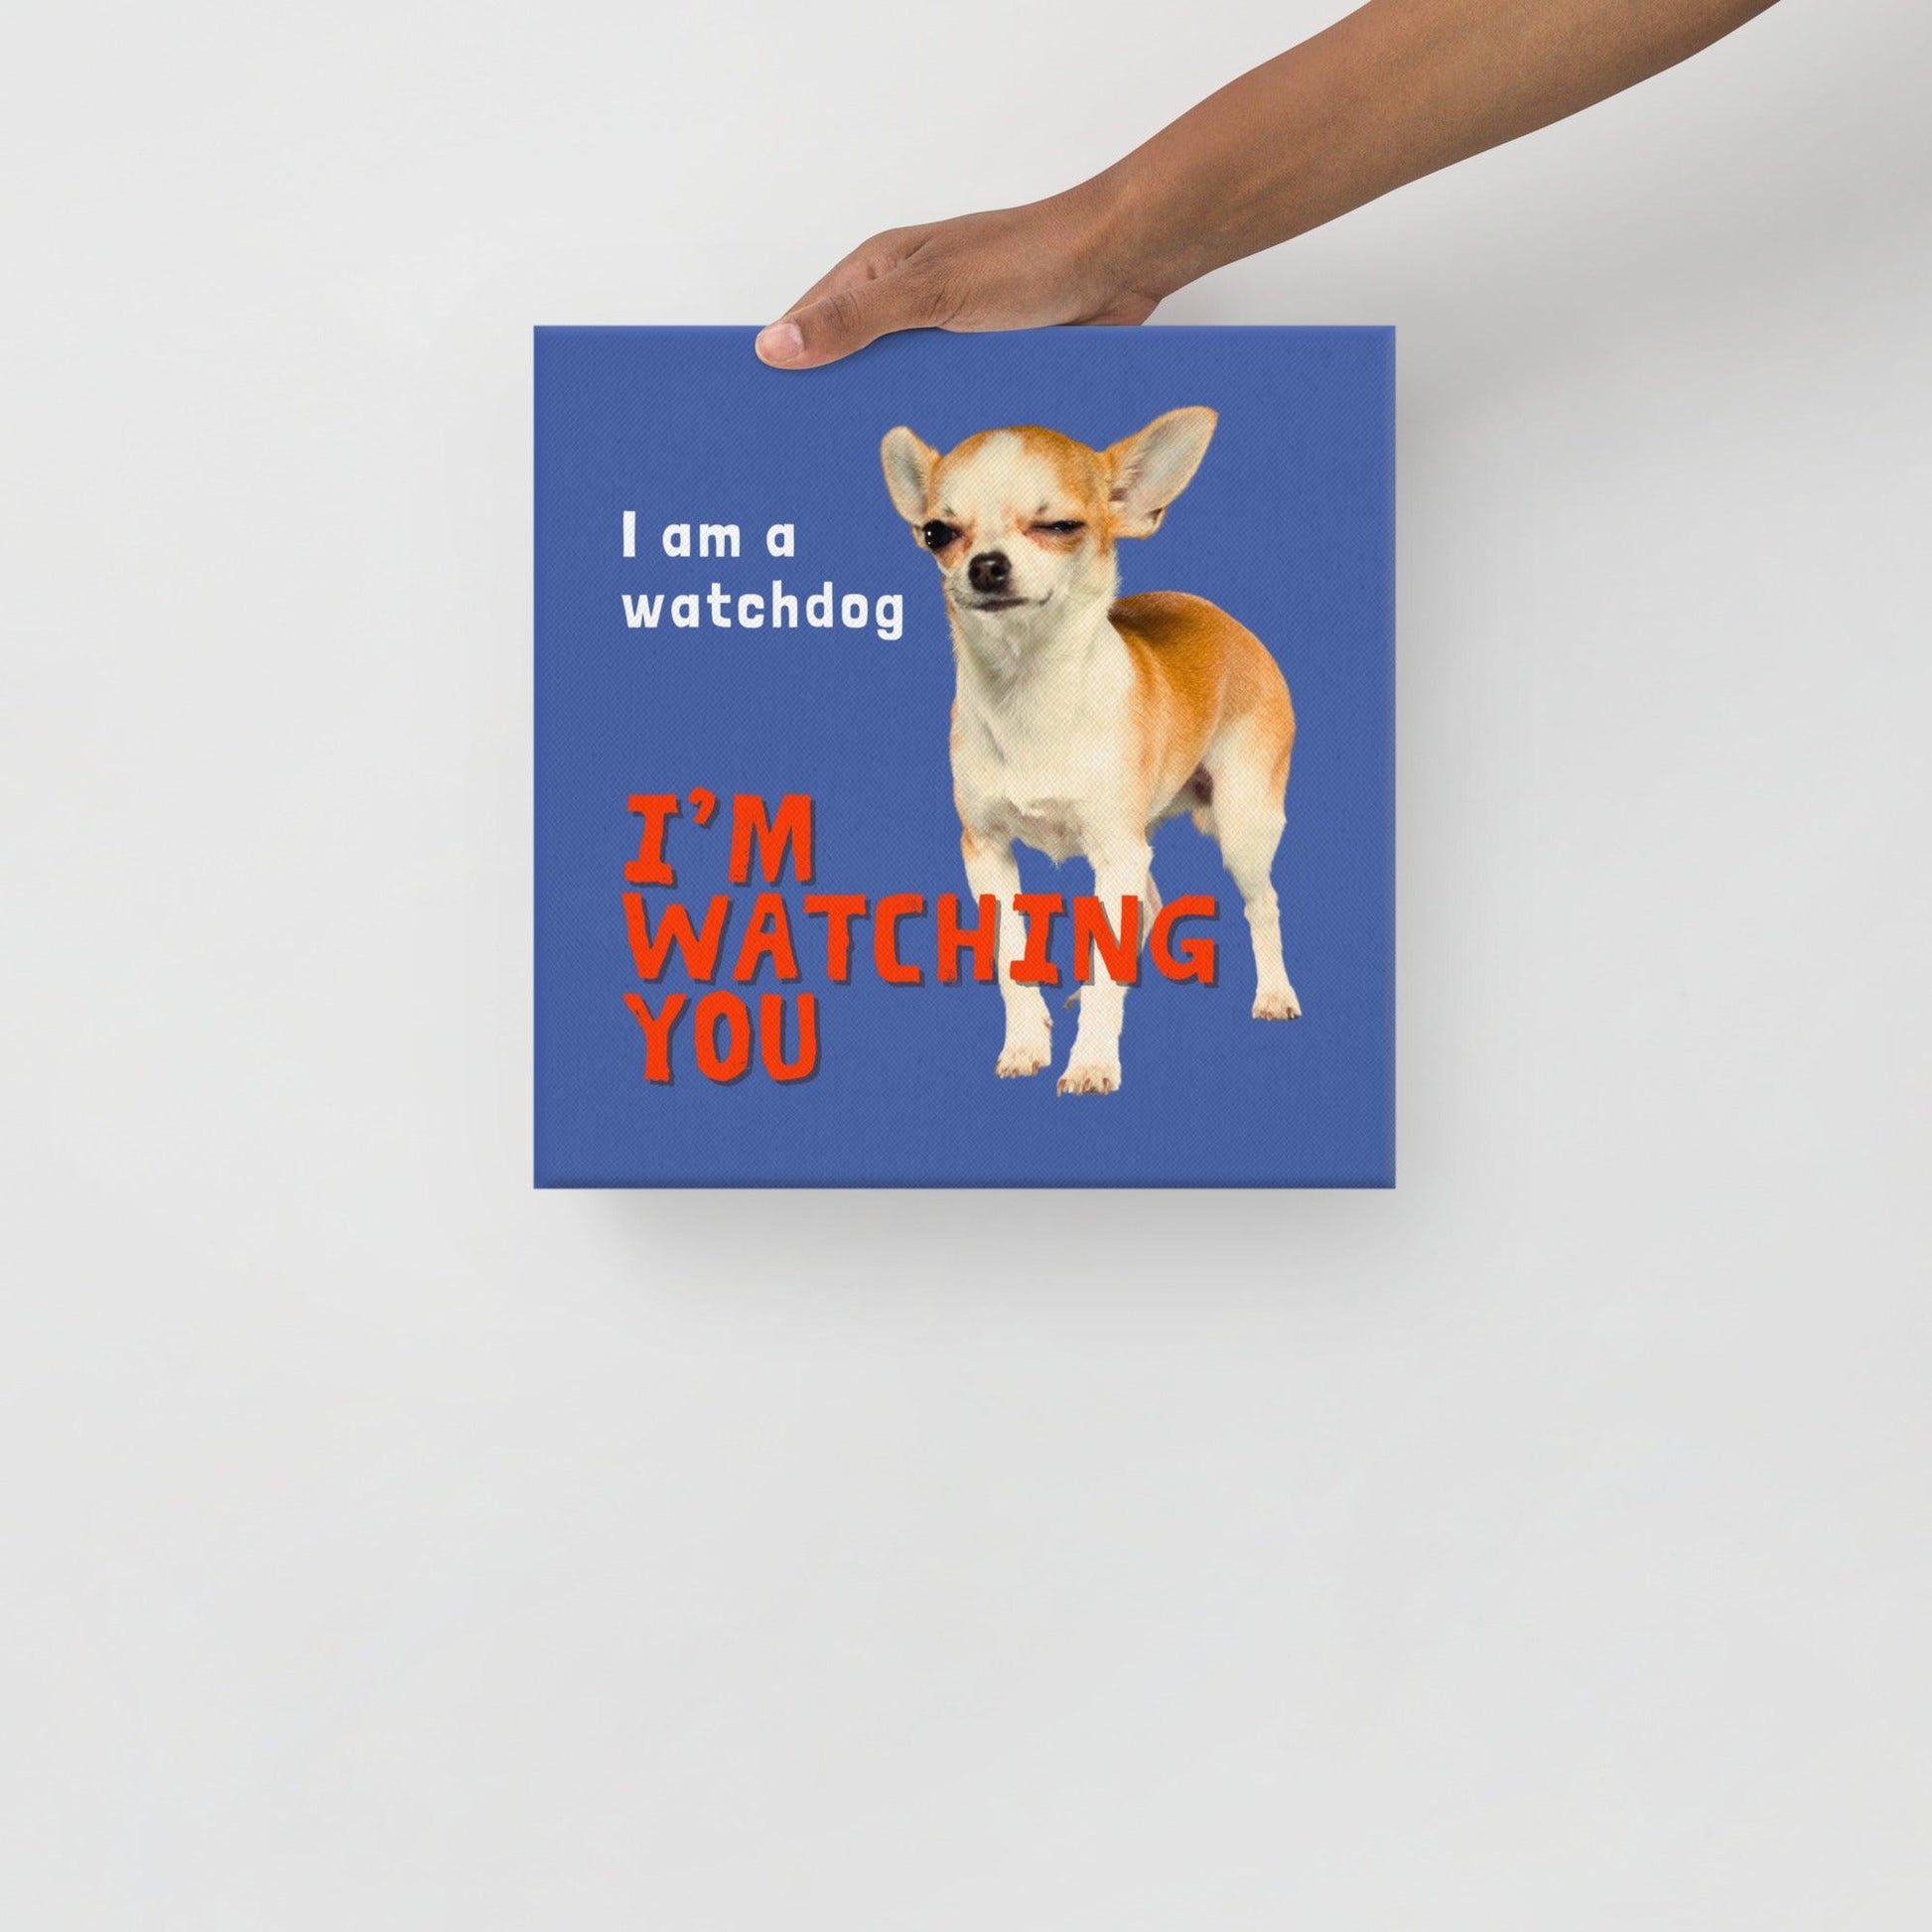 I am a watchdog; I'M WATCHING YOU - one of the famous Chimigos chihuahua memes.  This is a vivid and fade resistant art print on a stretched canvas. A cheeky gold, fawn and white shorthair chihuahua winks as they inform visitors that they will be watching their every move. A funny and stylish gift idea for someone whose house is presided over by a feisty and alert little chi. Perfect for the new chihuahua parent or as a housewarming gift!